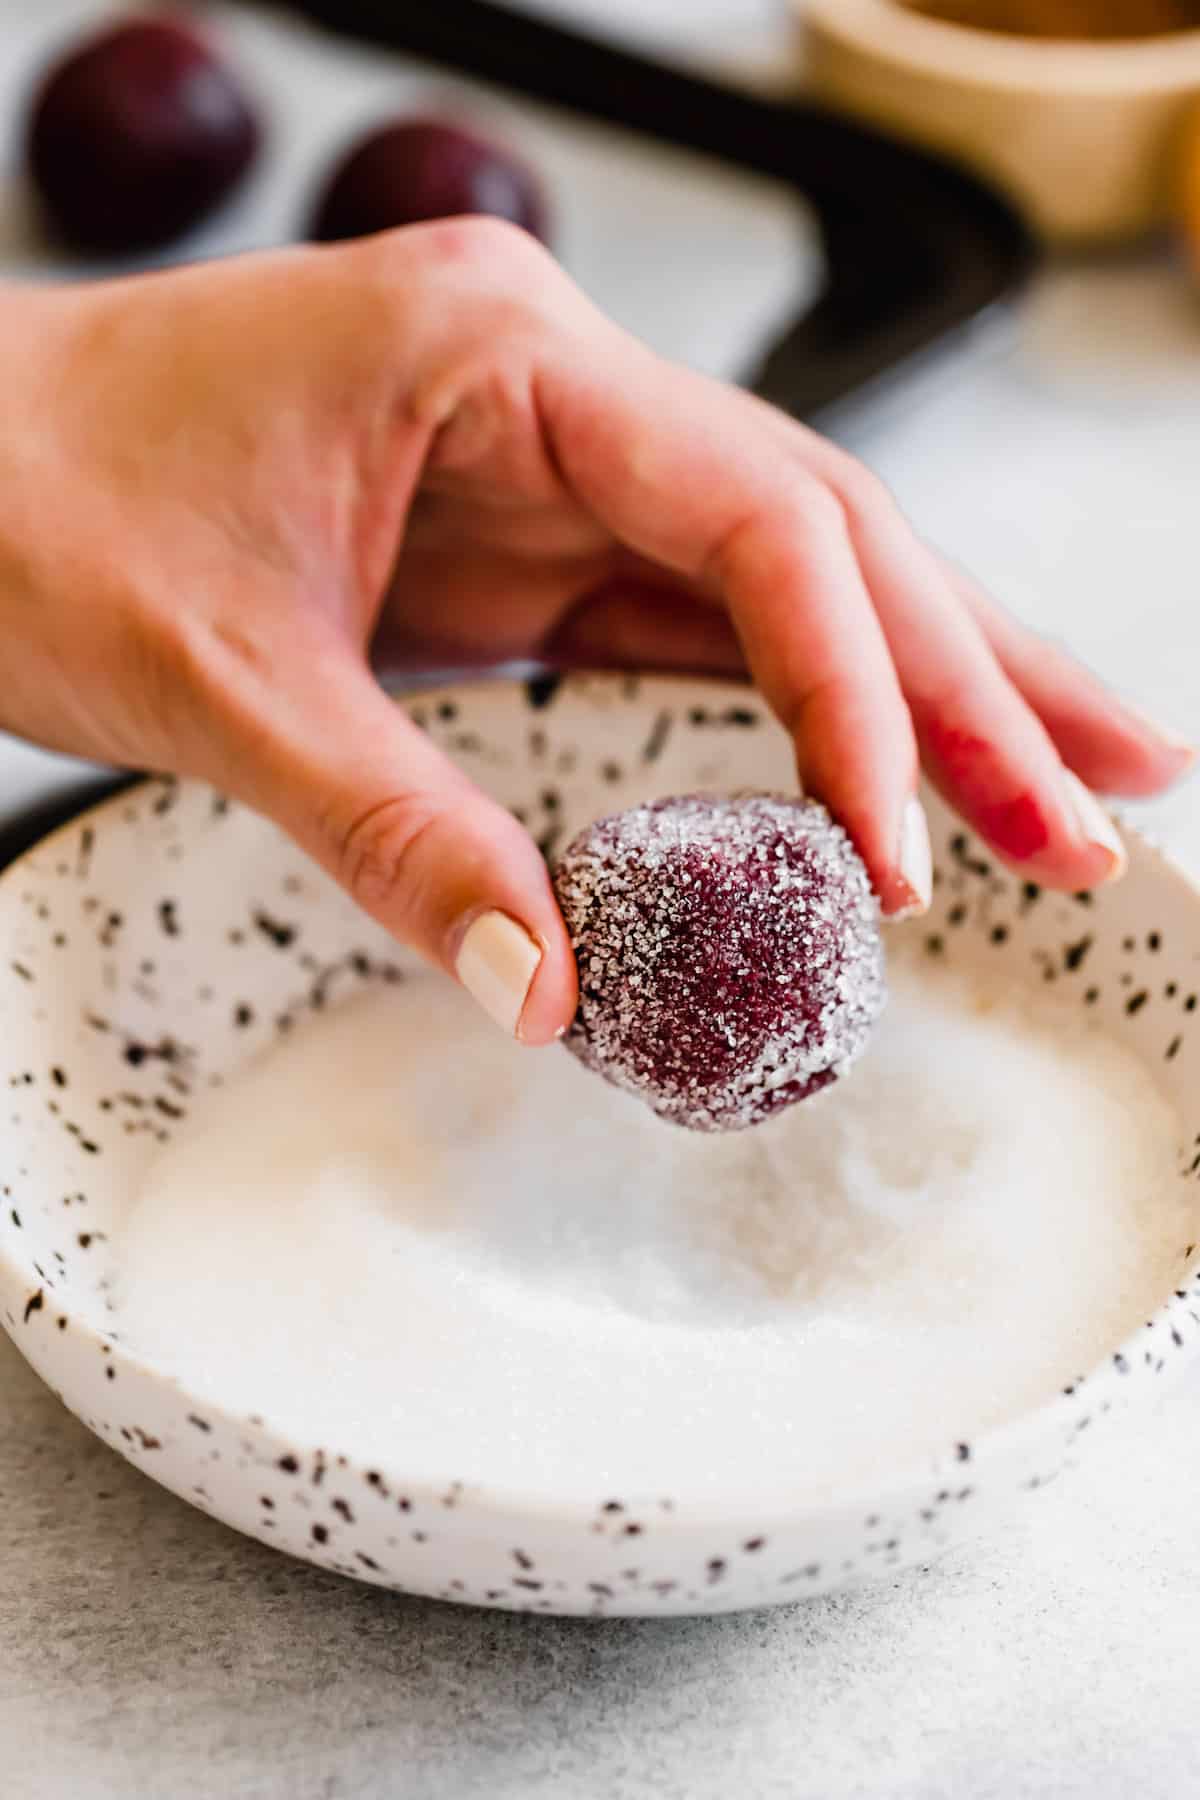 A Hand Holding a Sugar-Coated Ball of Red Velvet Cookie Dough